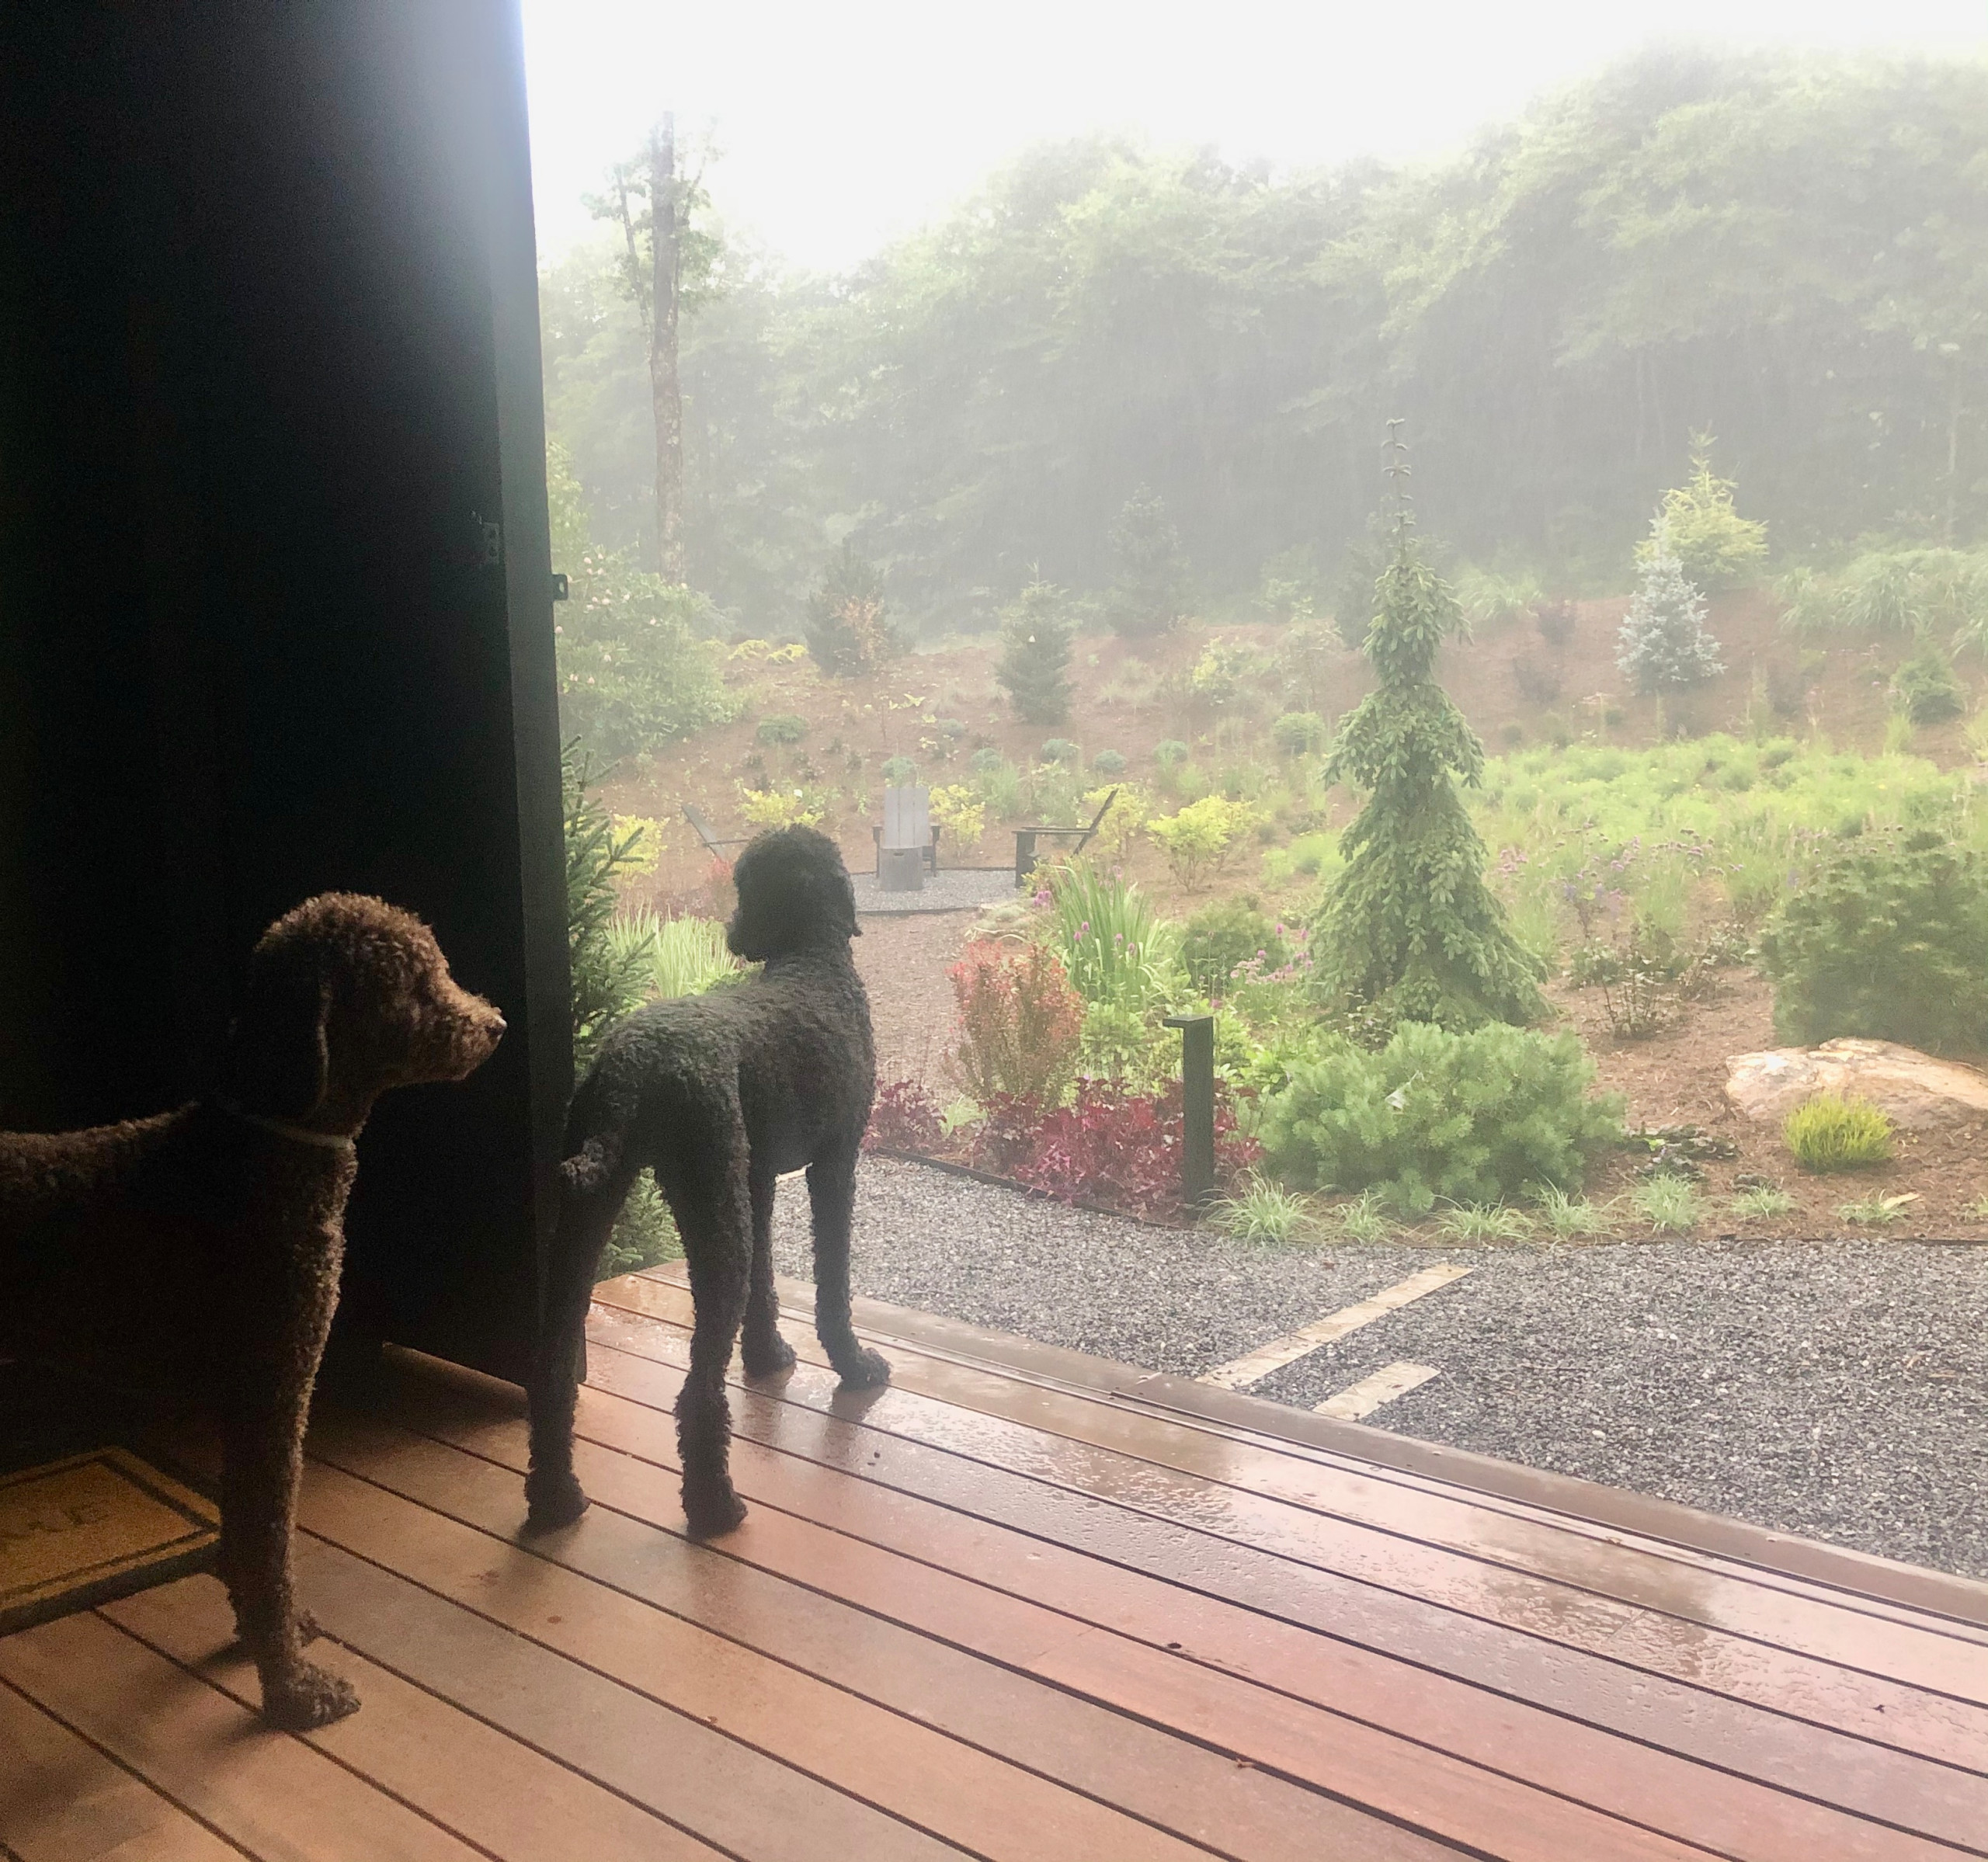 Amador and Sonoma watching the storm.